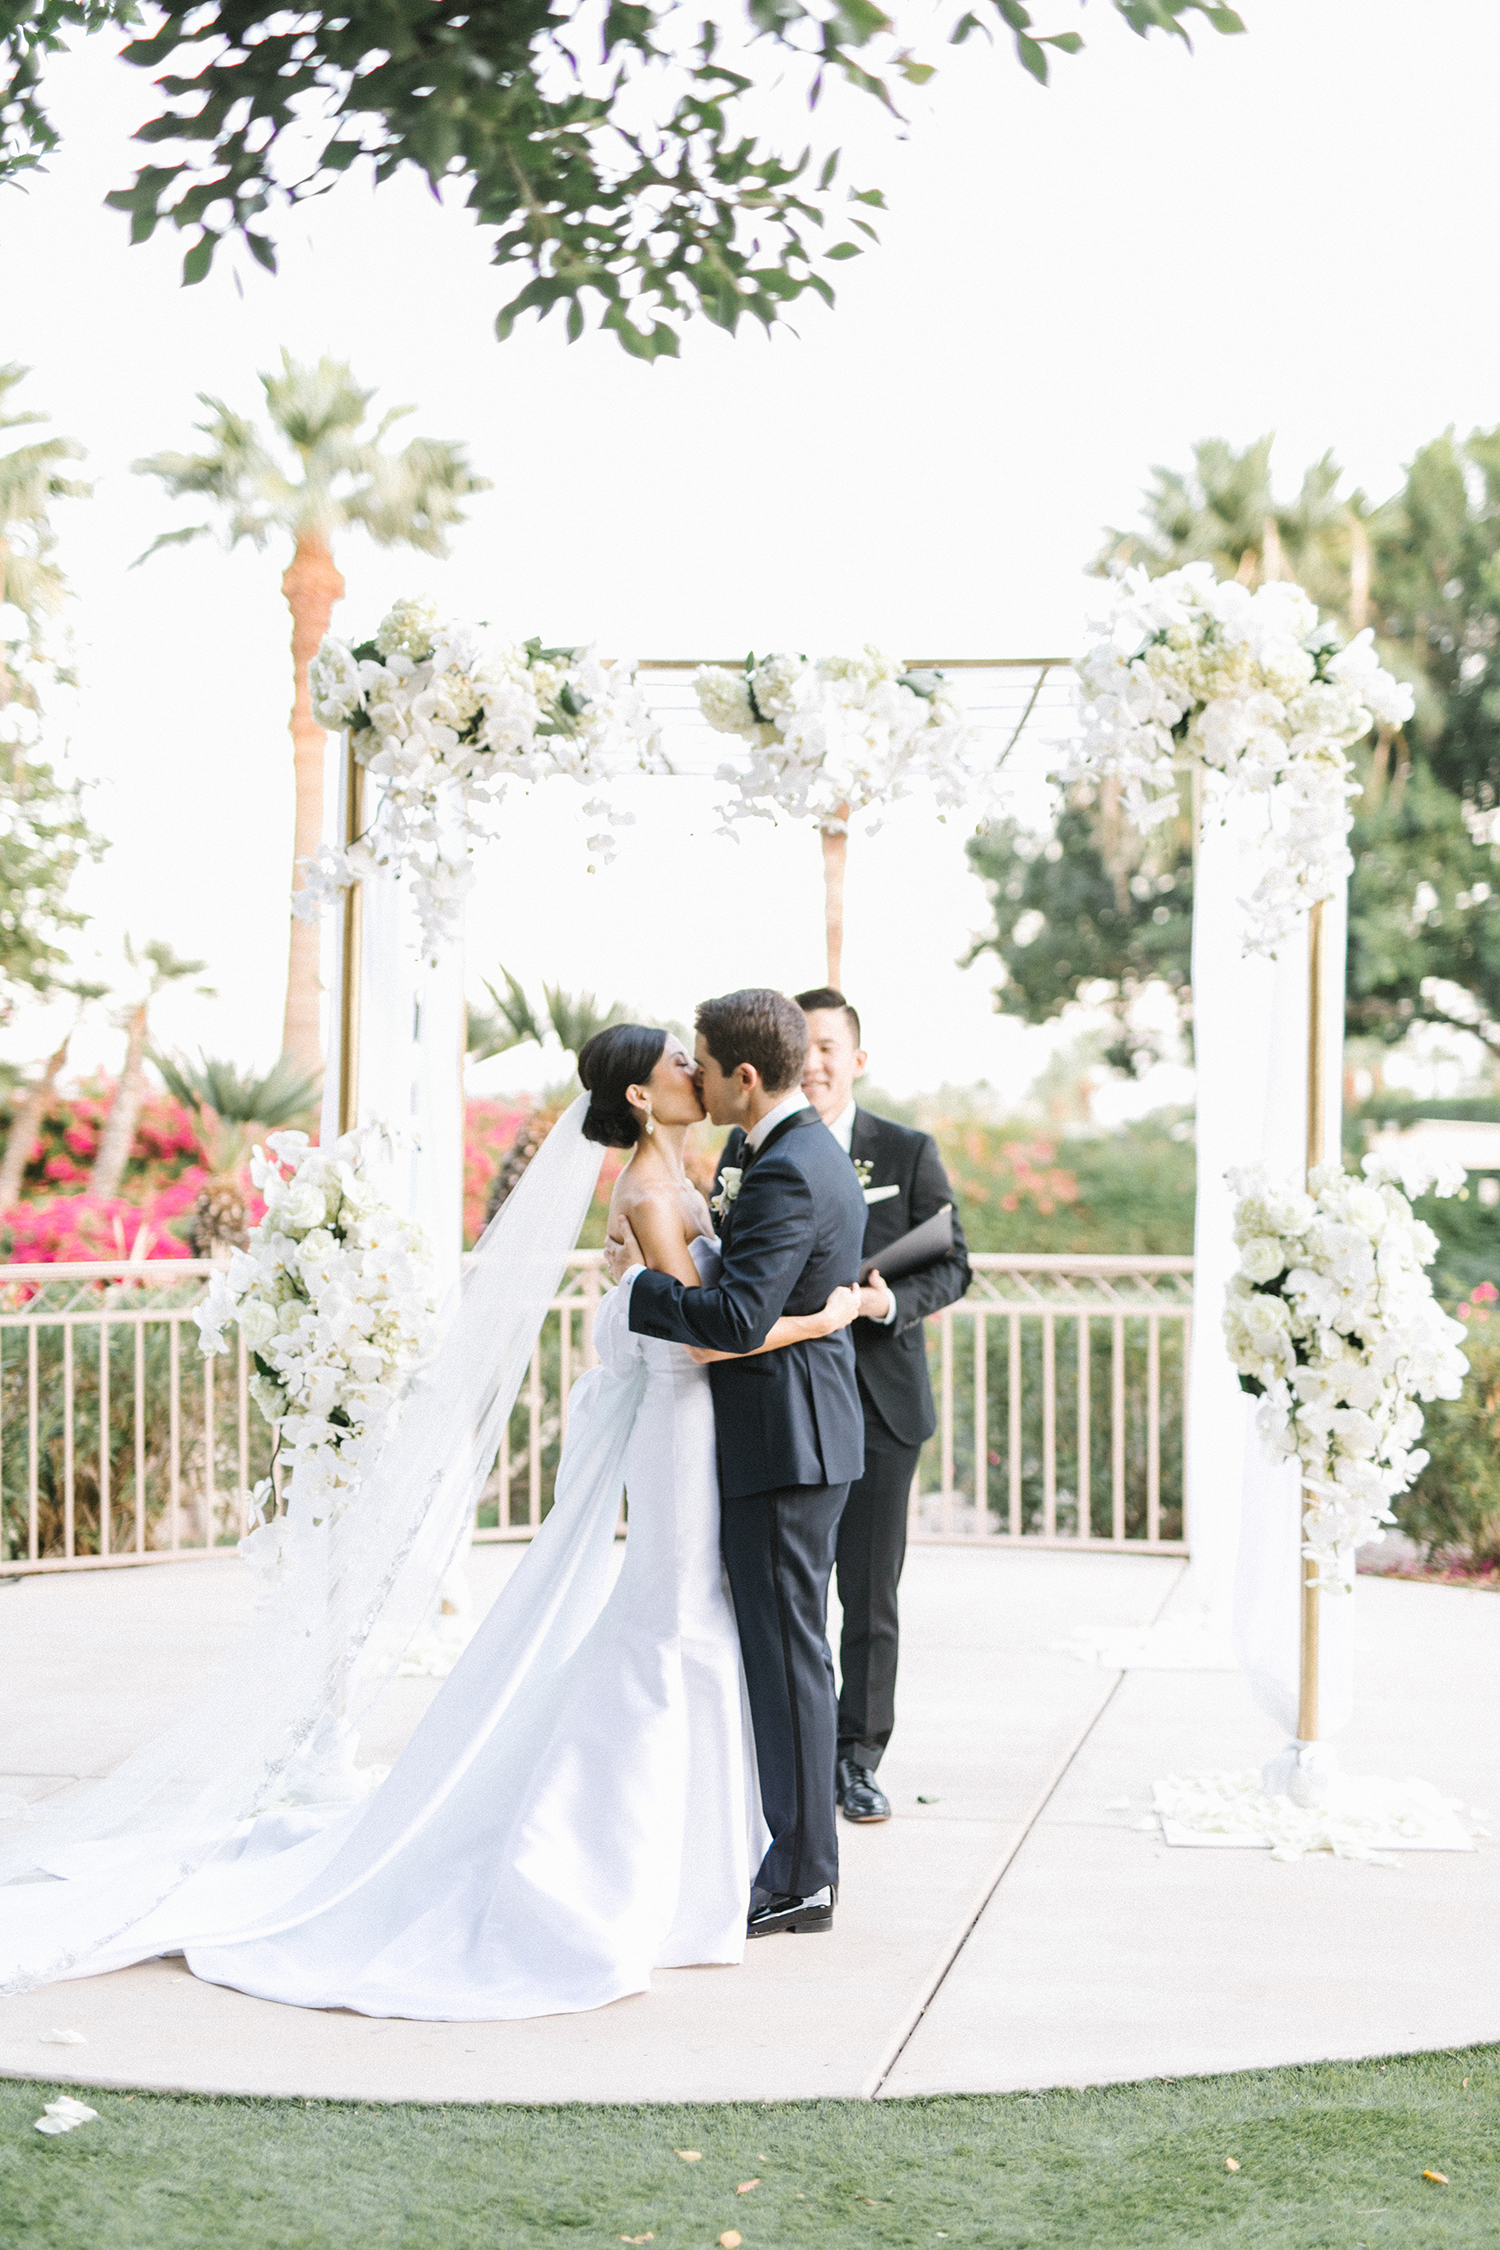 A Phoenician Resort Wedding in Arizona. Diana and Dan's big day was oozing elegance in every moment and detail. Catch Part One of their wedding | KatinaPhotography.com #PhoenicianWedding #ThePhoenicianResort #PhoenicianResort #ScottsdaleArizona #ScottsdaleArizonaWedding #ScottsdaleArizonaWeddingVenues #ArizonaWeddingPhotographer #WeddingPhotographyInspiration #WeddingStylingIdeas #ArizonaWeddingIdeas #ArizonaWeddingPhotography #WeddingIdeas #WeddingDecorations #WeddingDress #ArizonaWedding #ArizonaPhotographer